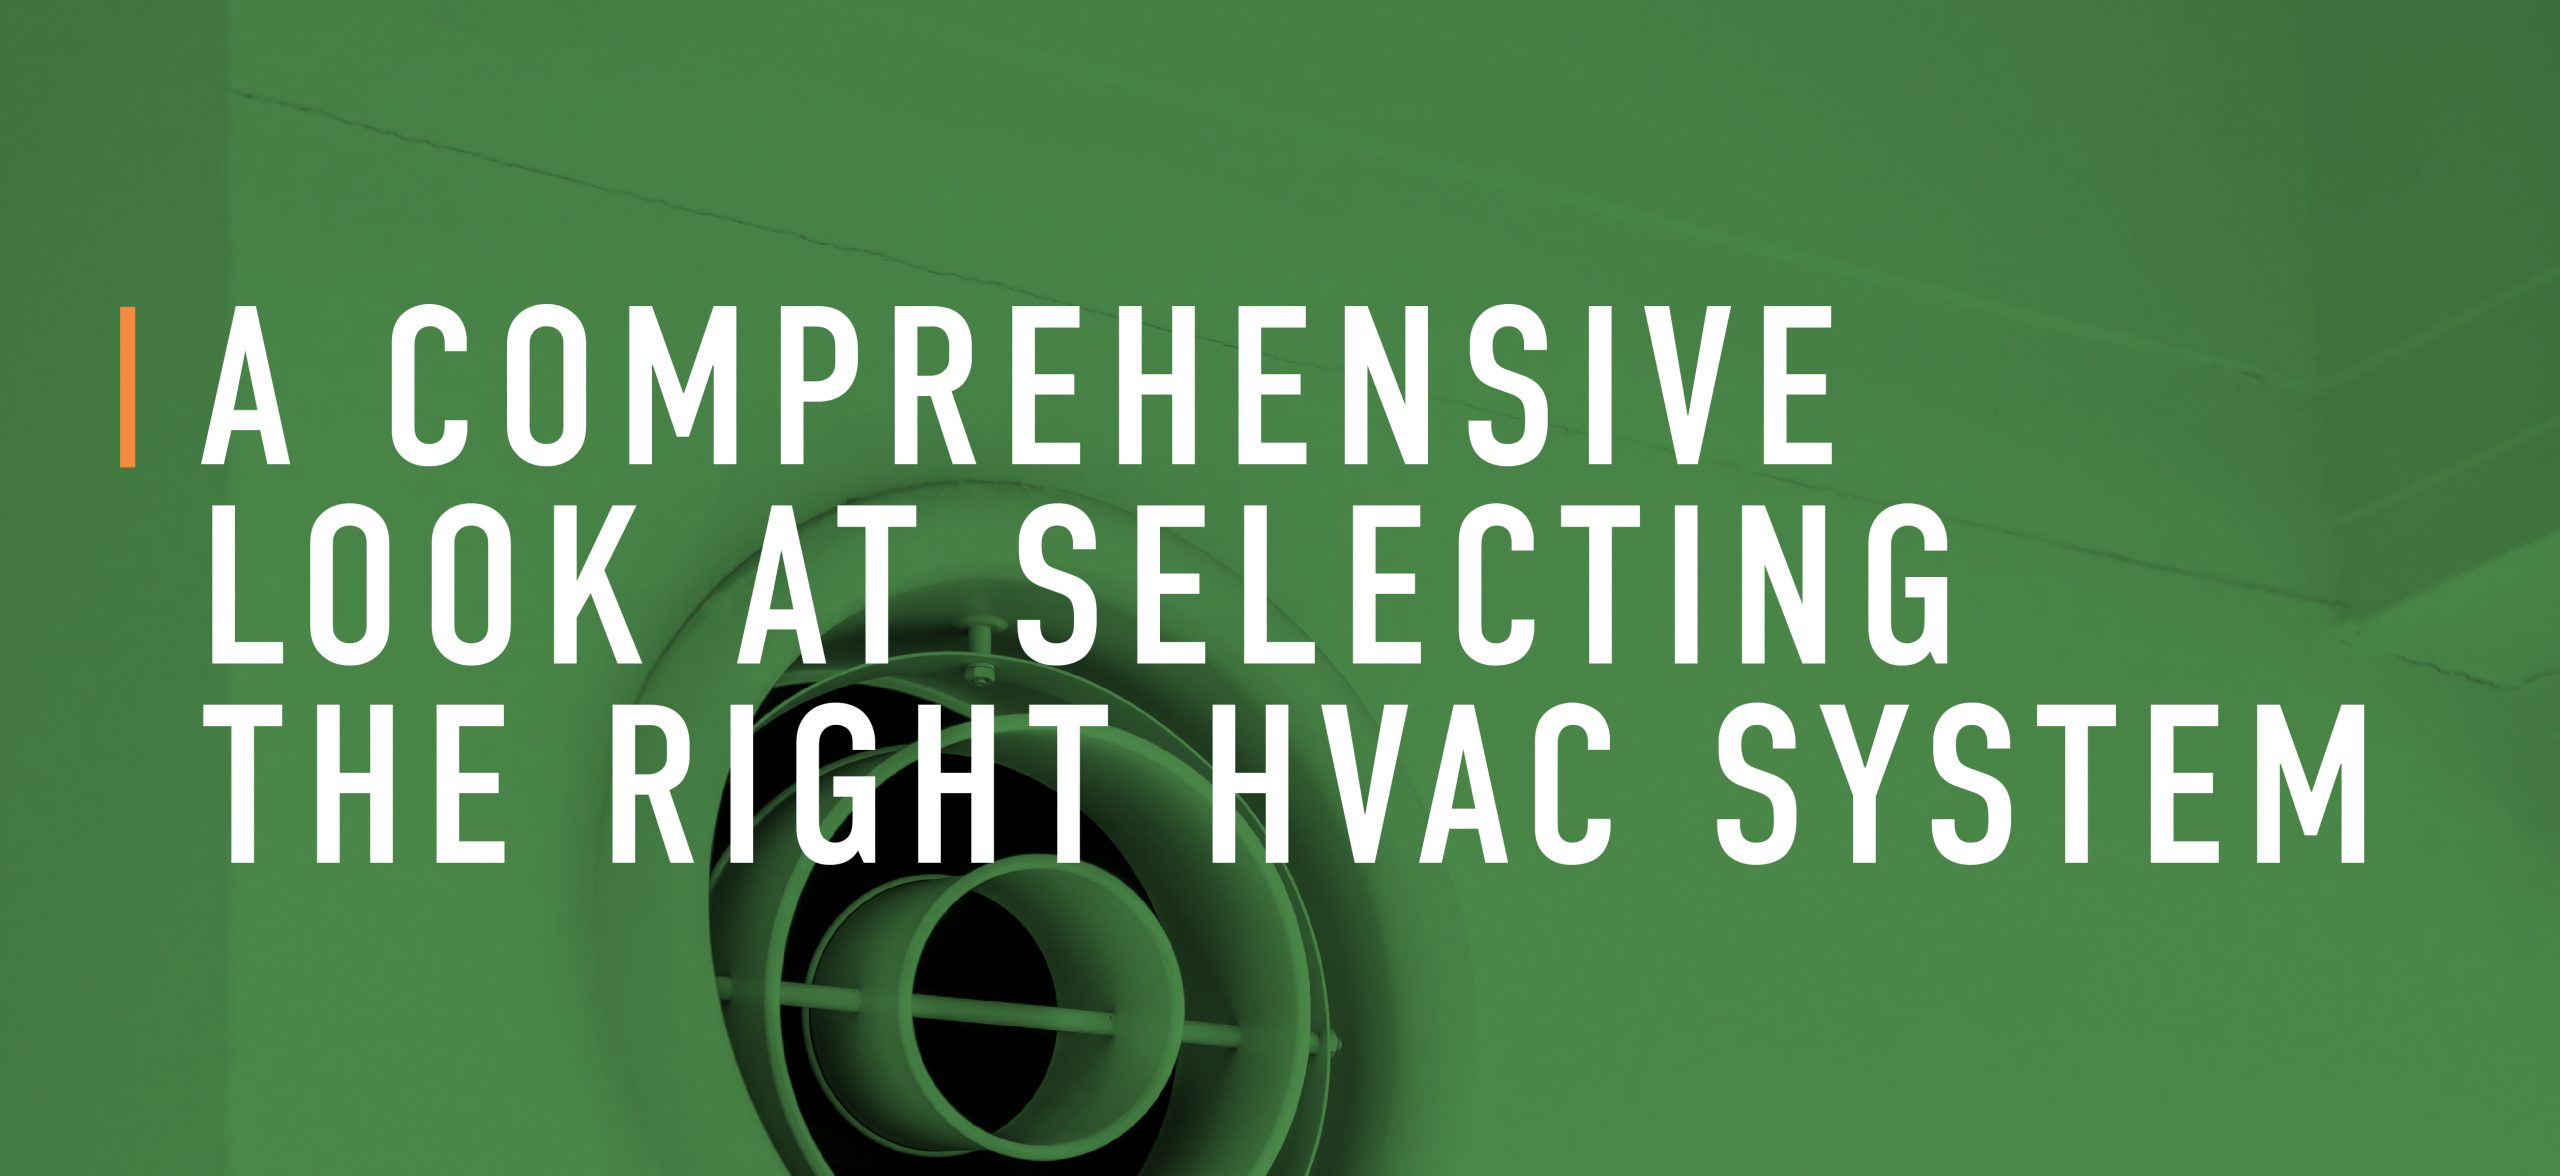 A Comprehensive Look at Selecting the Right HVAC System